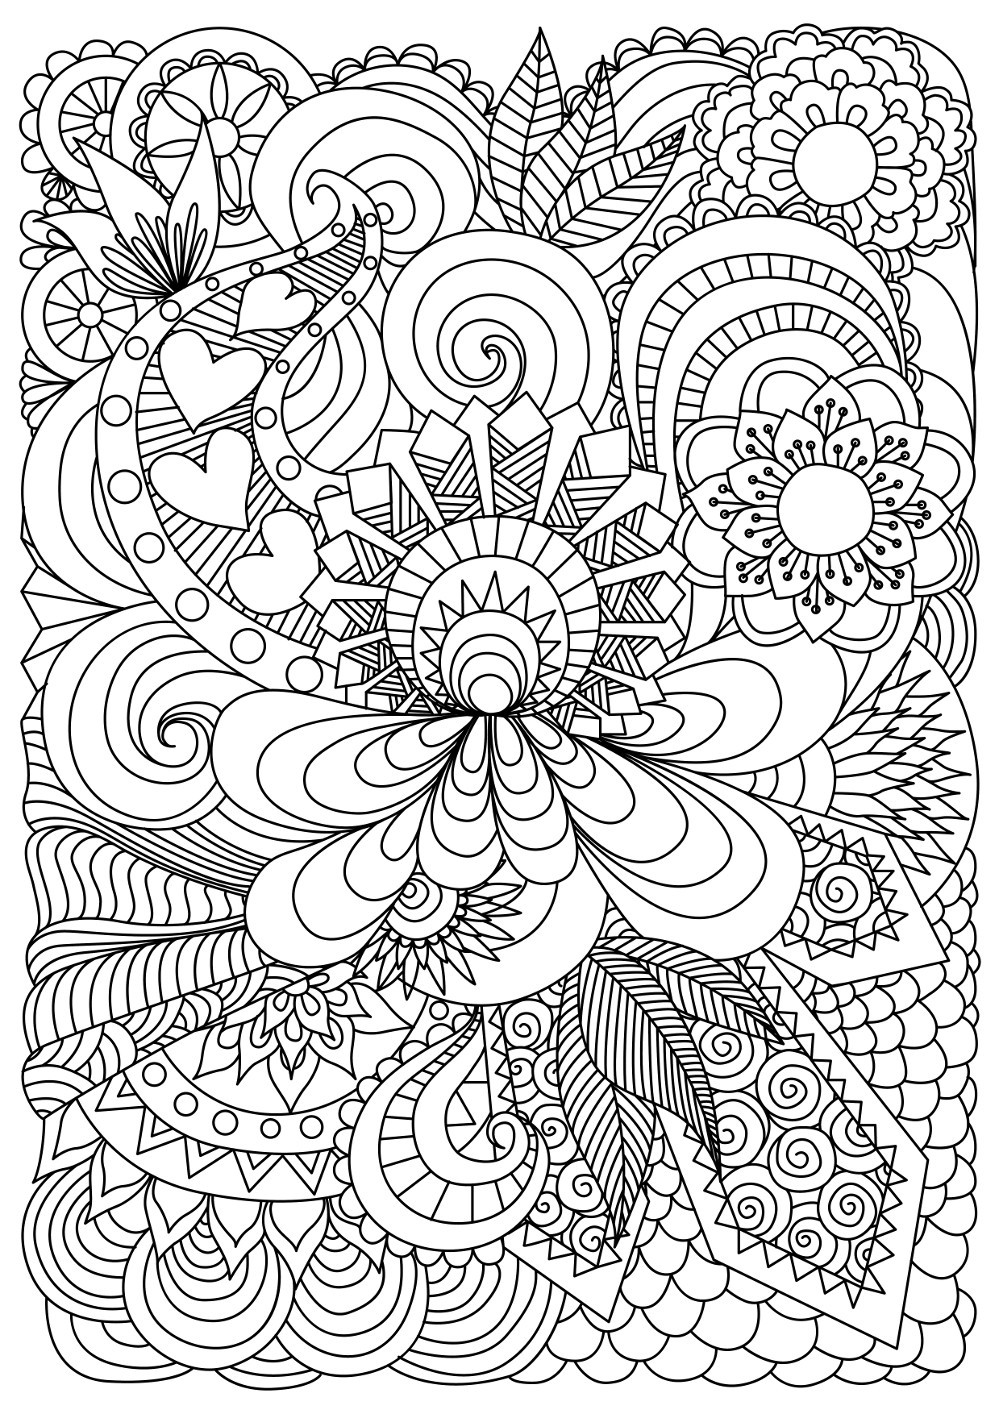 Adult Printable Coloring Pages
 37 Best Adults Coloring Pages Updated 2018